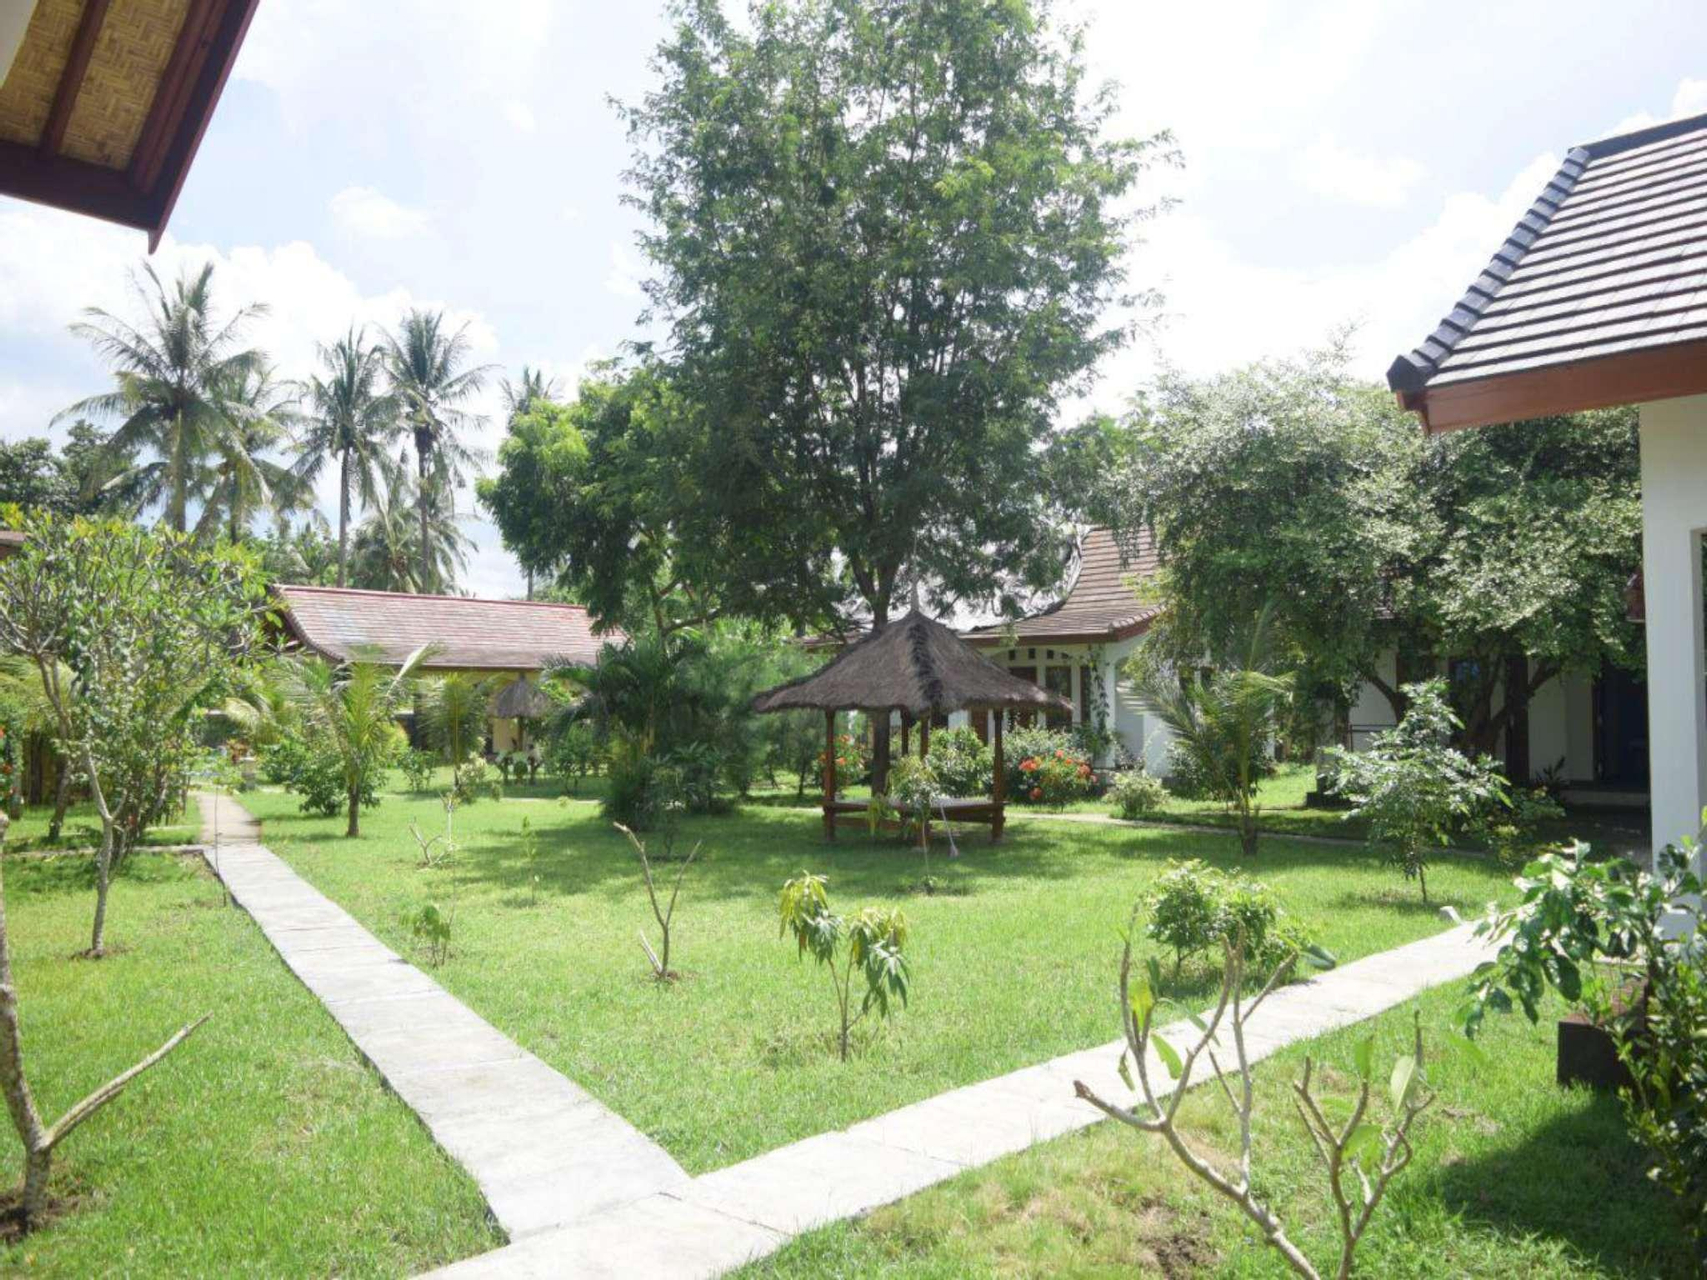 Exterior & Views 2, One Bedroom Superior Air Conditioning 02, Lombok